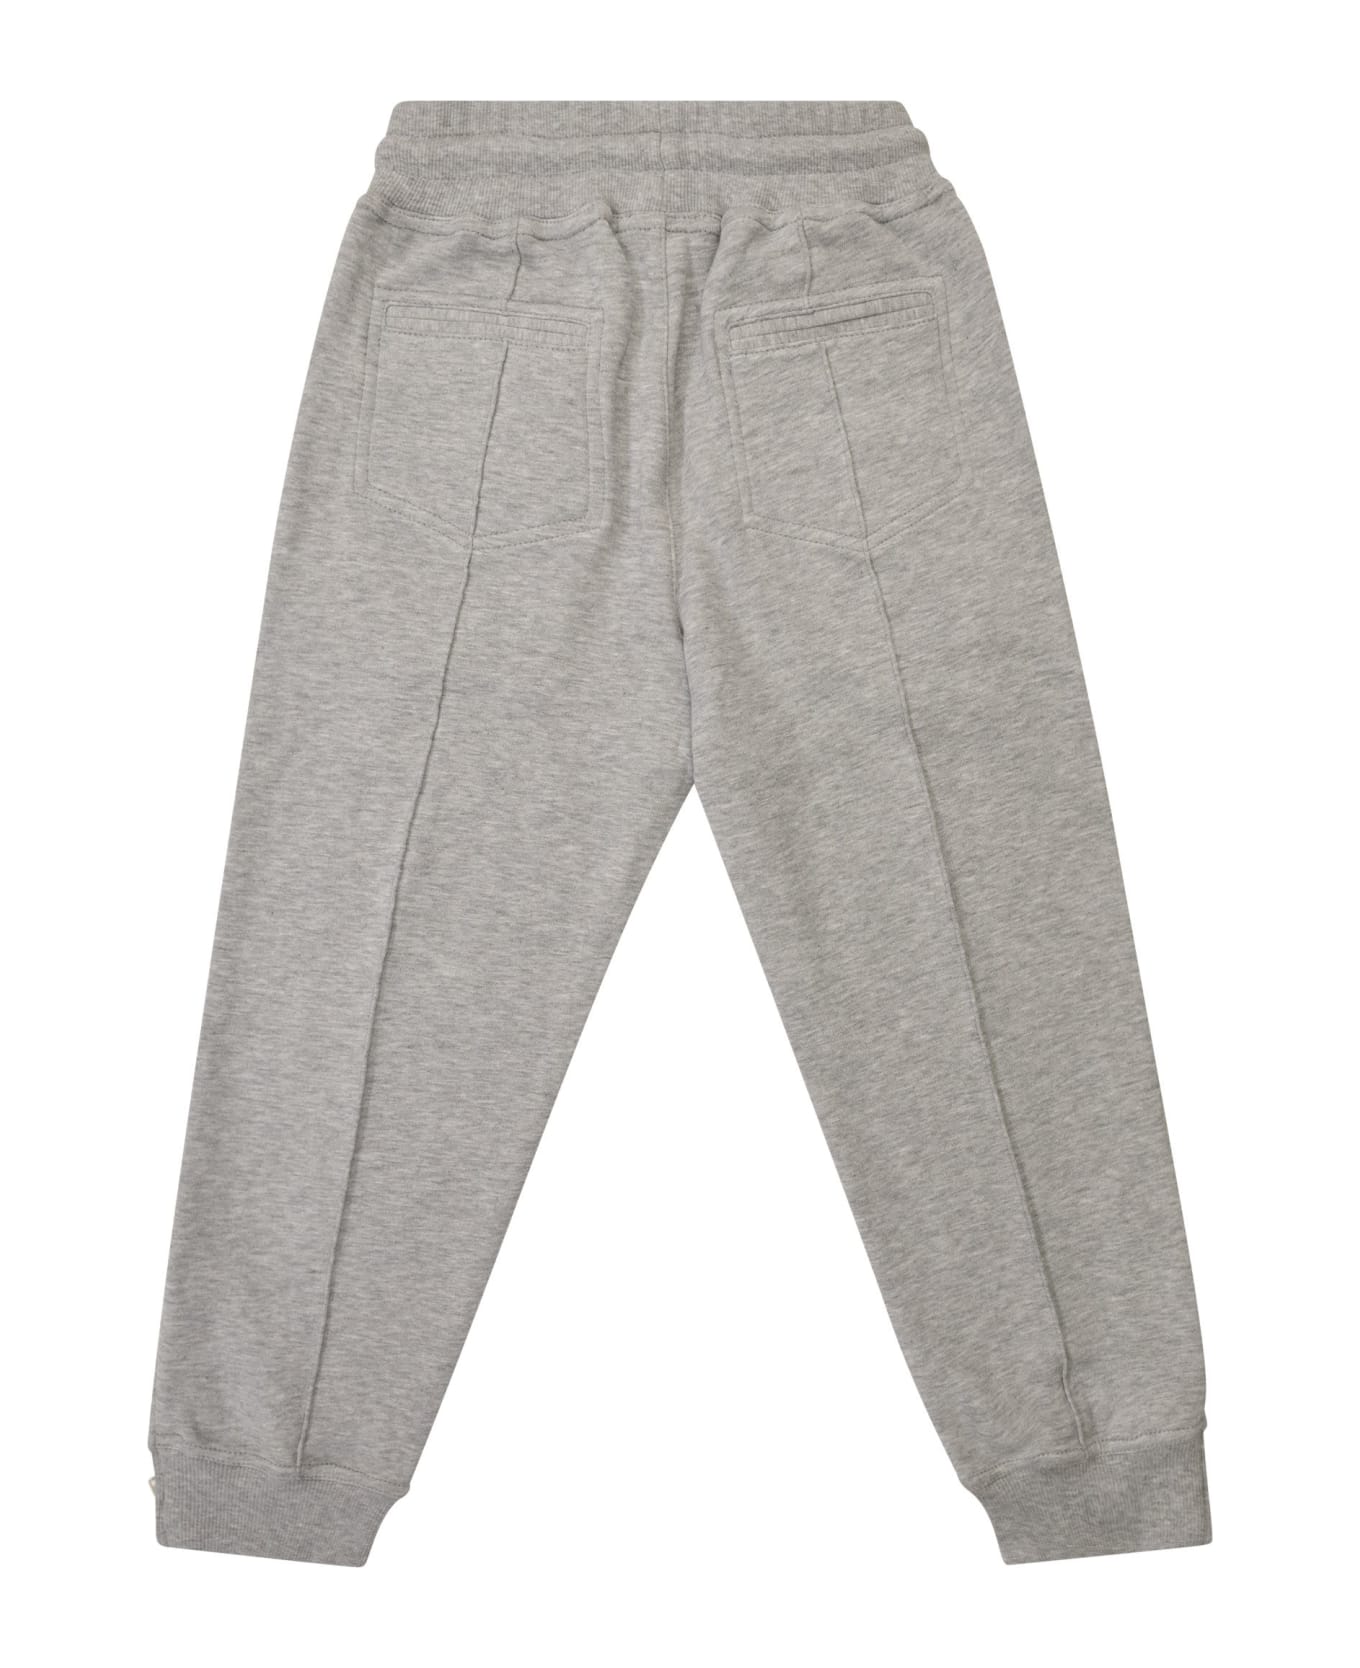 Brunello Cucinelli Techno Cotton Fleece Trousers With Crête And Elasticated Bottom With Zip - Grey ボトムス